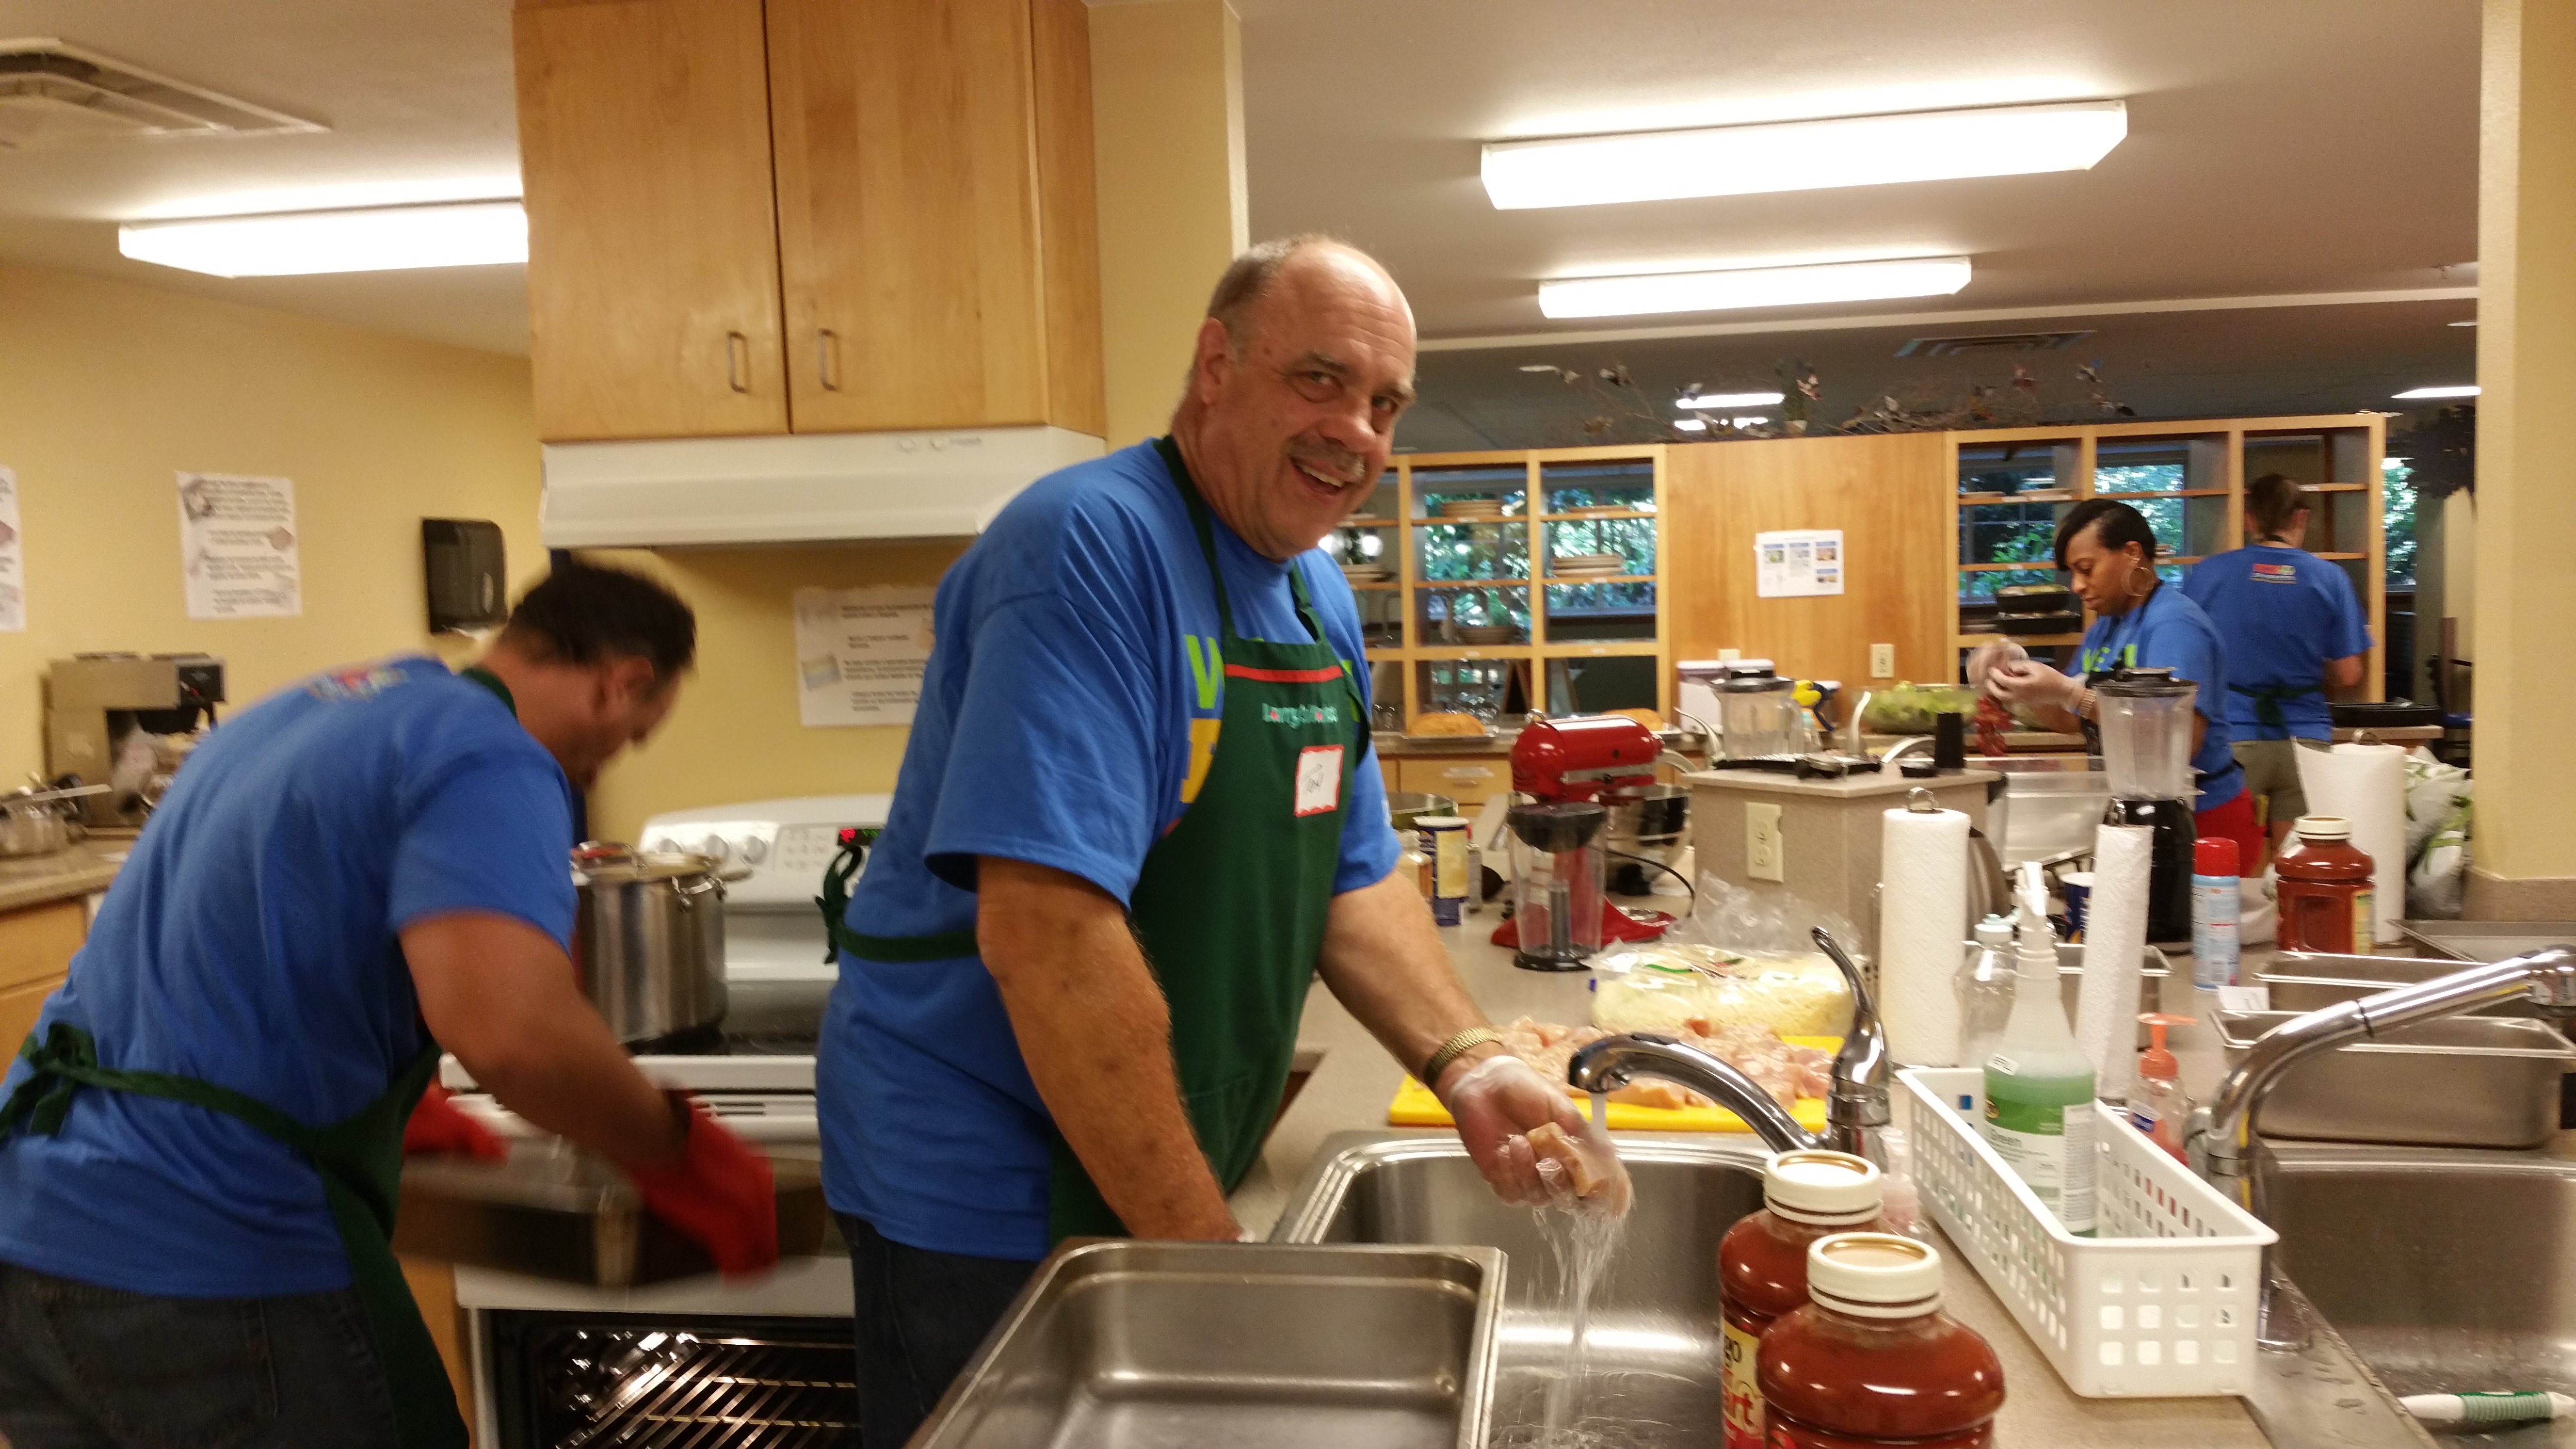 Microsoft loaned professional Tom Brown helps prepare dinner for hospitalized children and their families at Ronald McDonald House.